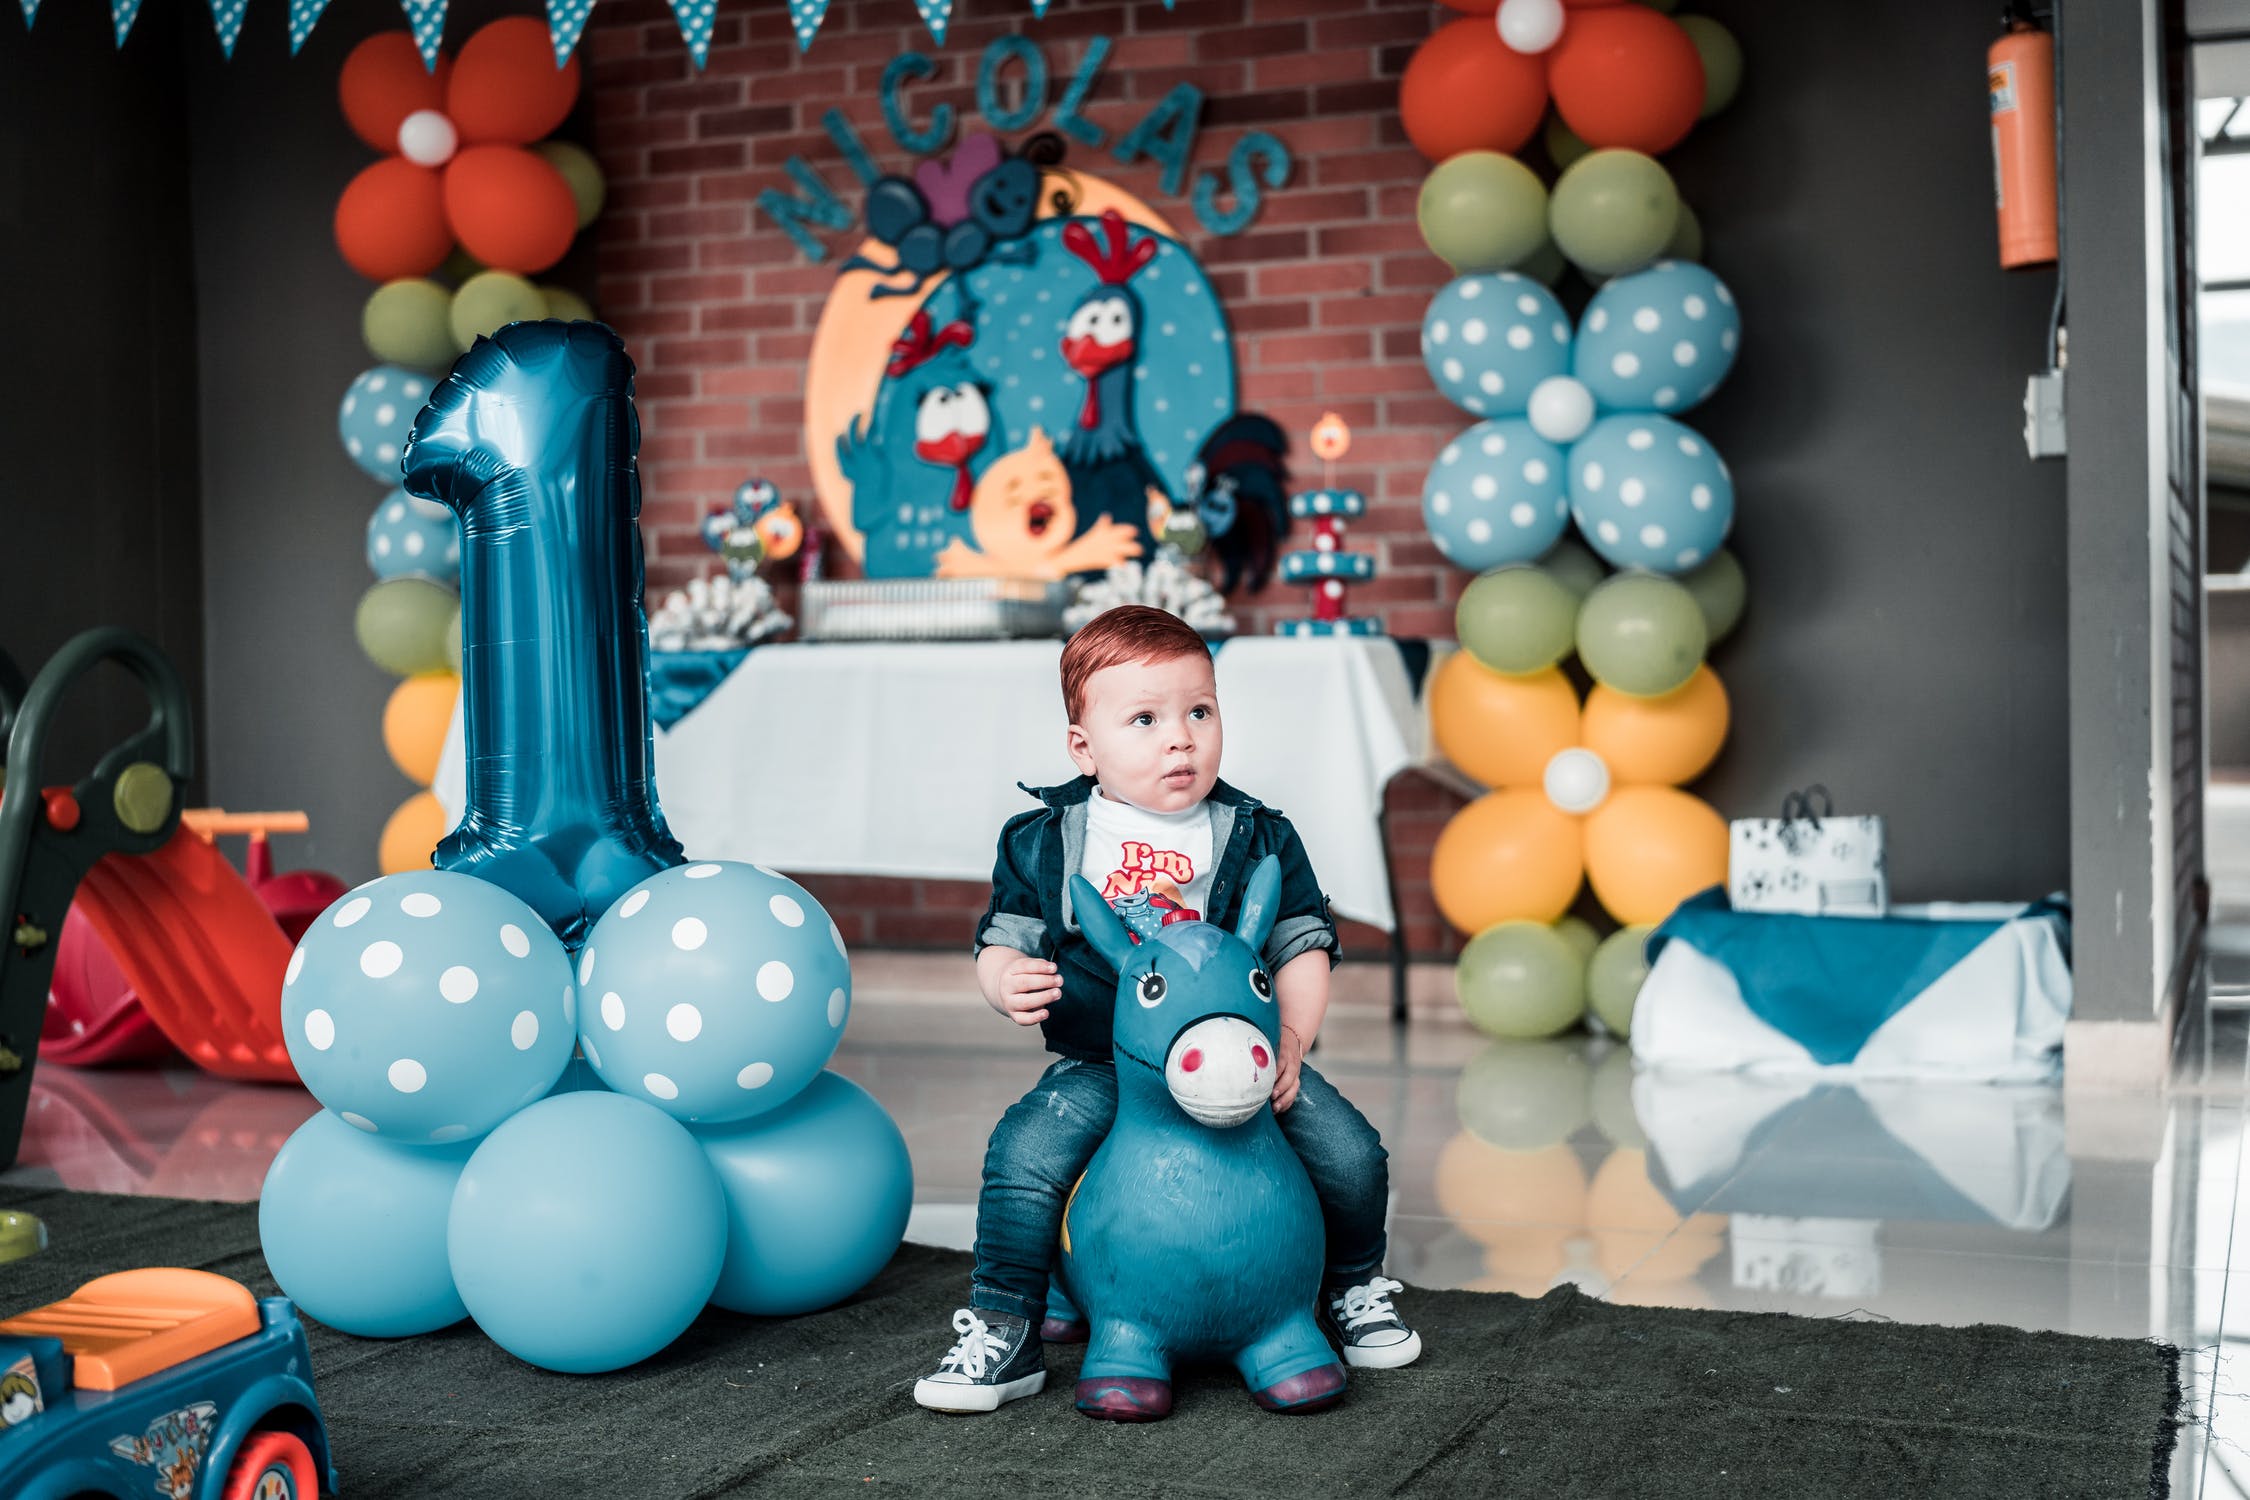 The birthday party | Source: Pexels